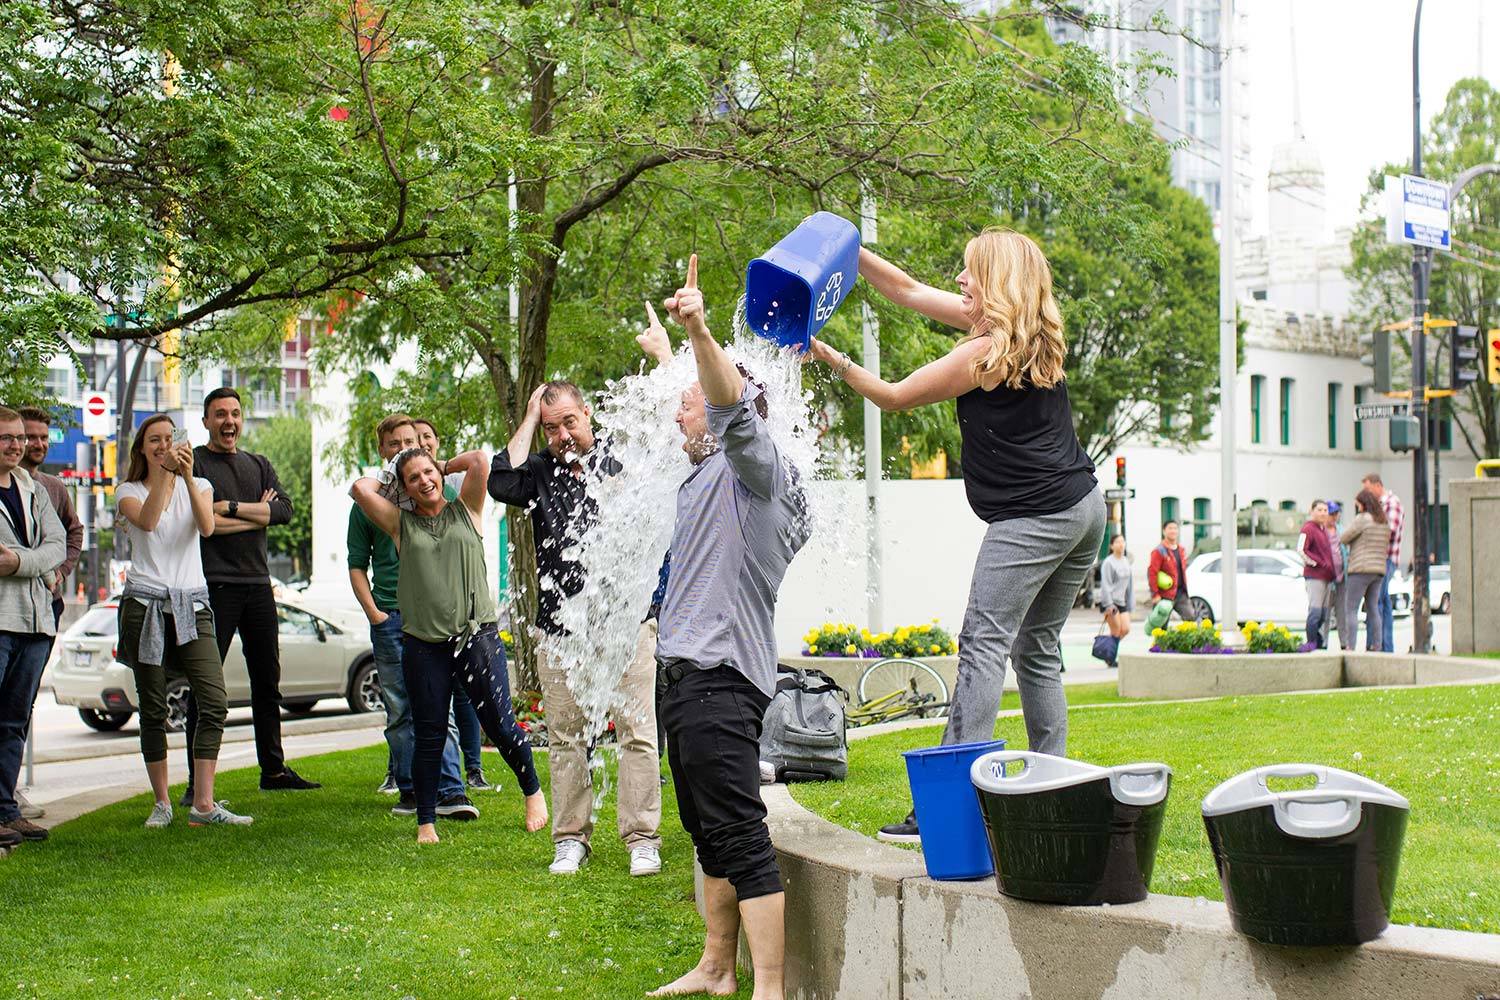 a man partaking in the ice bucket challenge as other people looking on